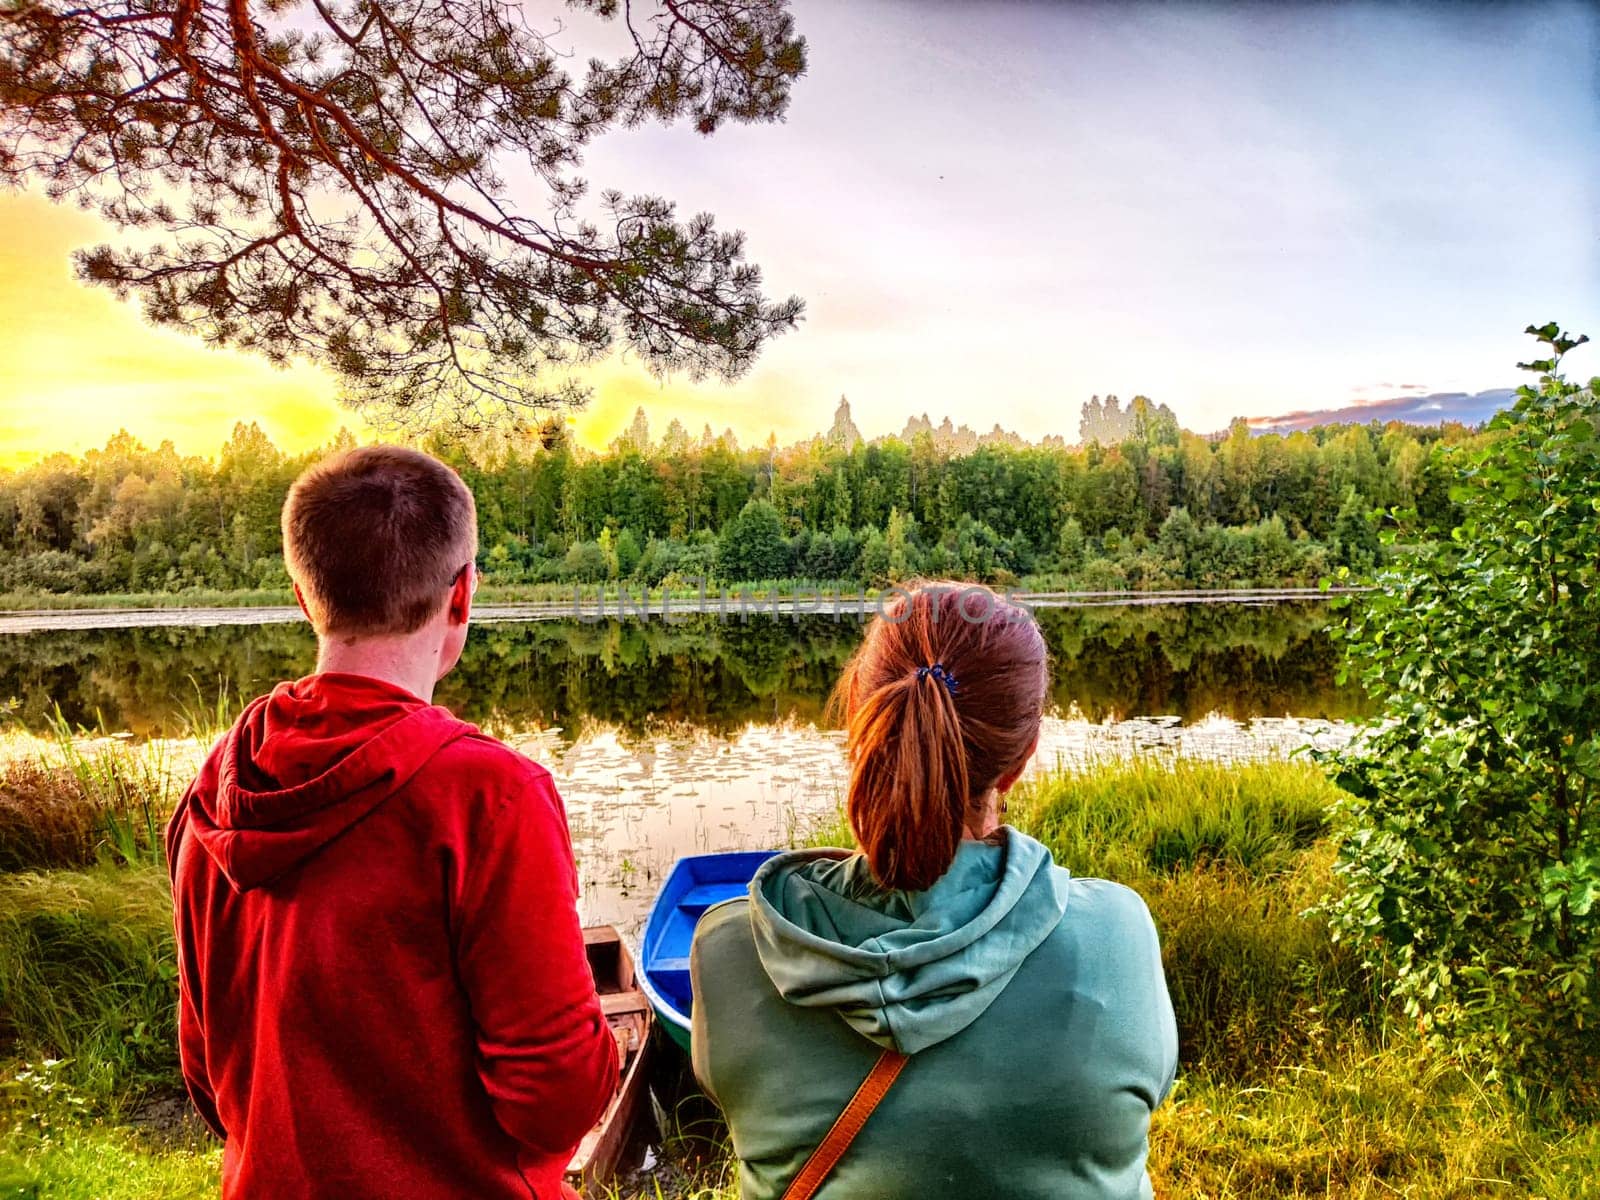 Tourist Couple Enjoying a Lakeside Sunset in Nature. A couple watches the sunset by a tranquil lake, surrounded by trees by keleny